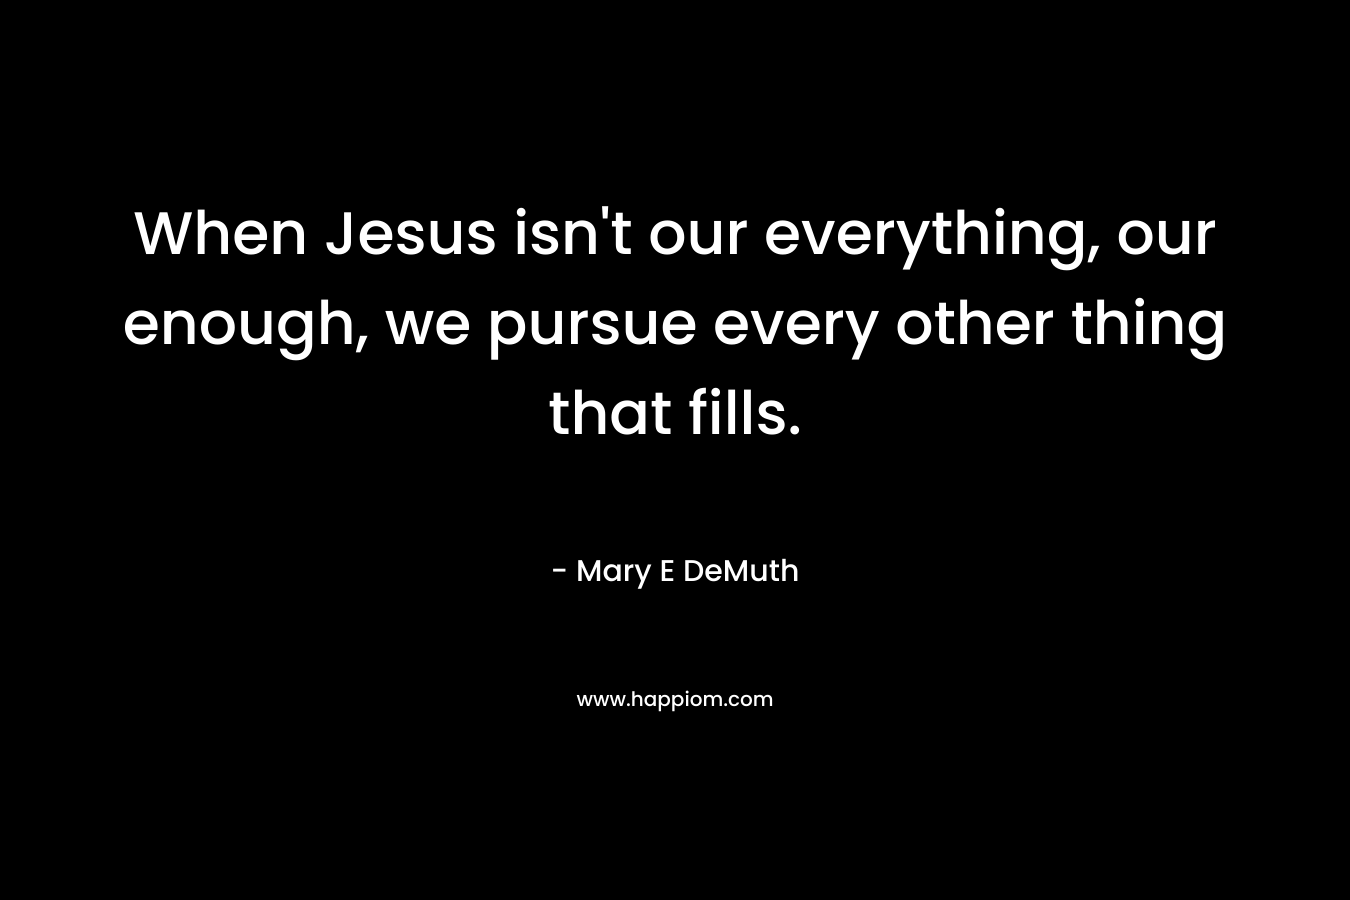 When Jesus isn't our everything, our enough, we pursue every other thing that fills.